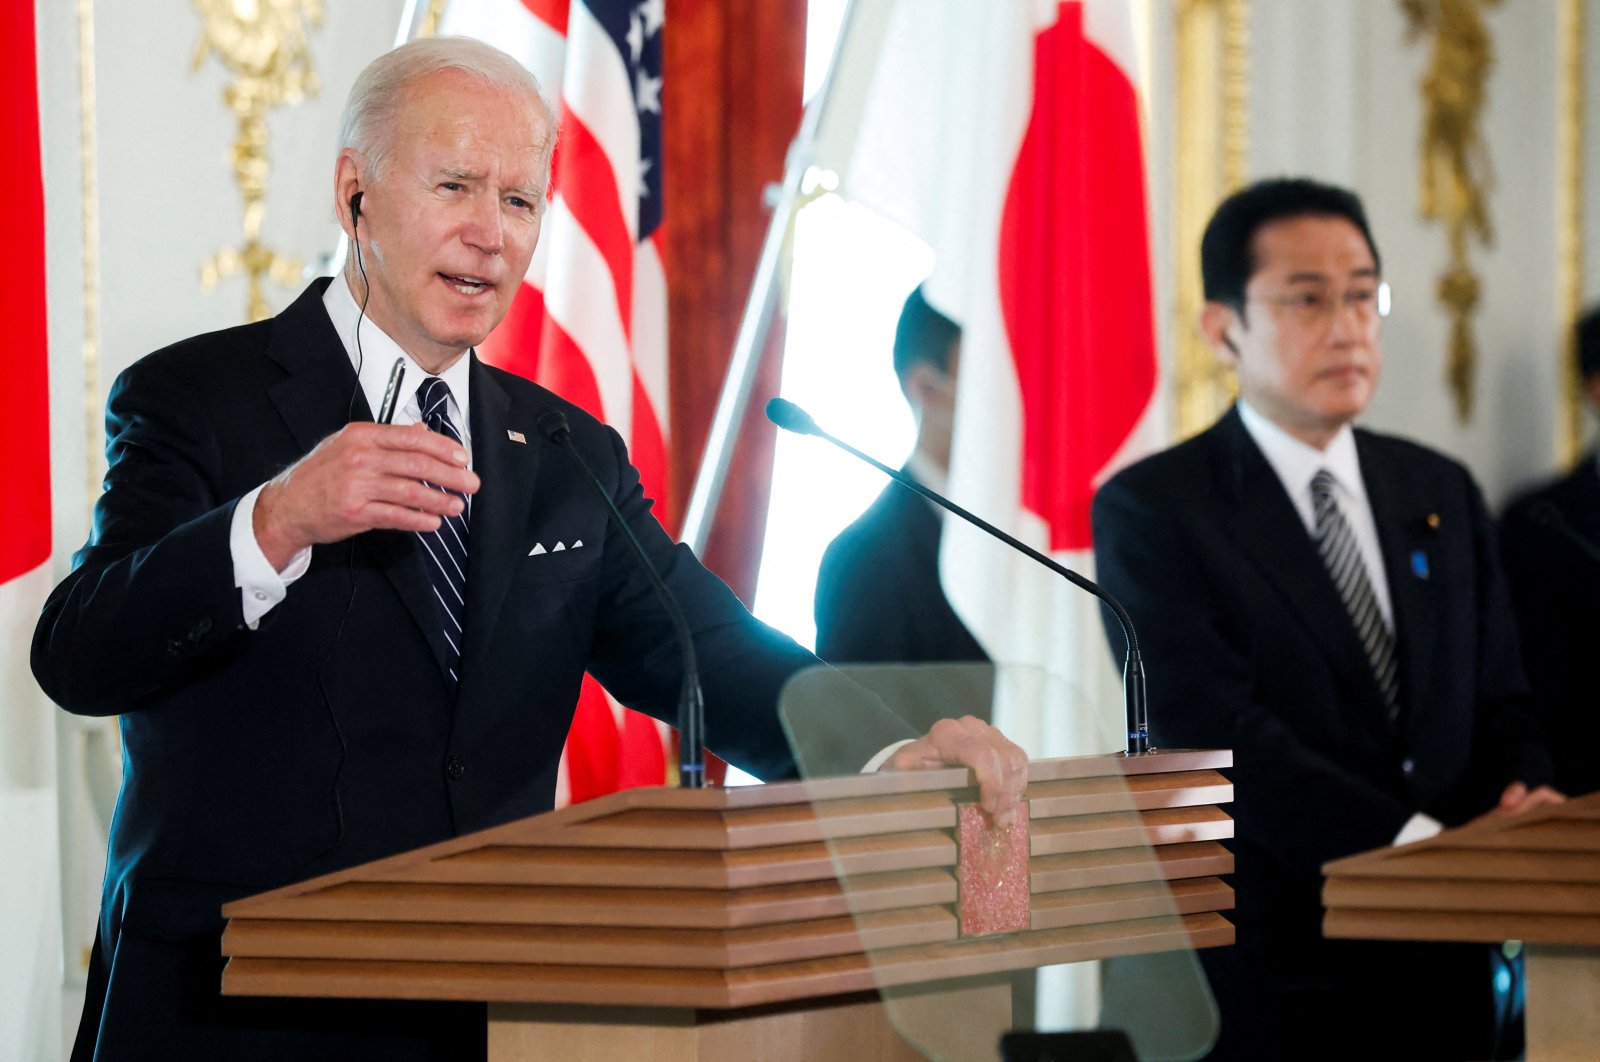 U.S. President Joe Biden speaks during a joint news conference with Japan&#039;s Prime Minister Fumio Kishida after their bilateral meeting at Akasaka Palace in Tokyo, Japan, May 23, 2022. (Reuters Photo)